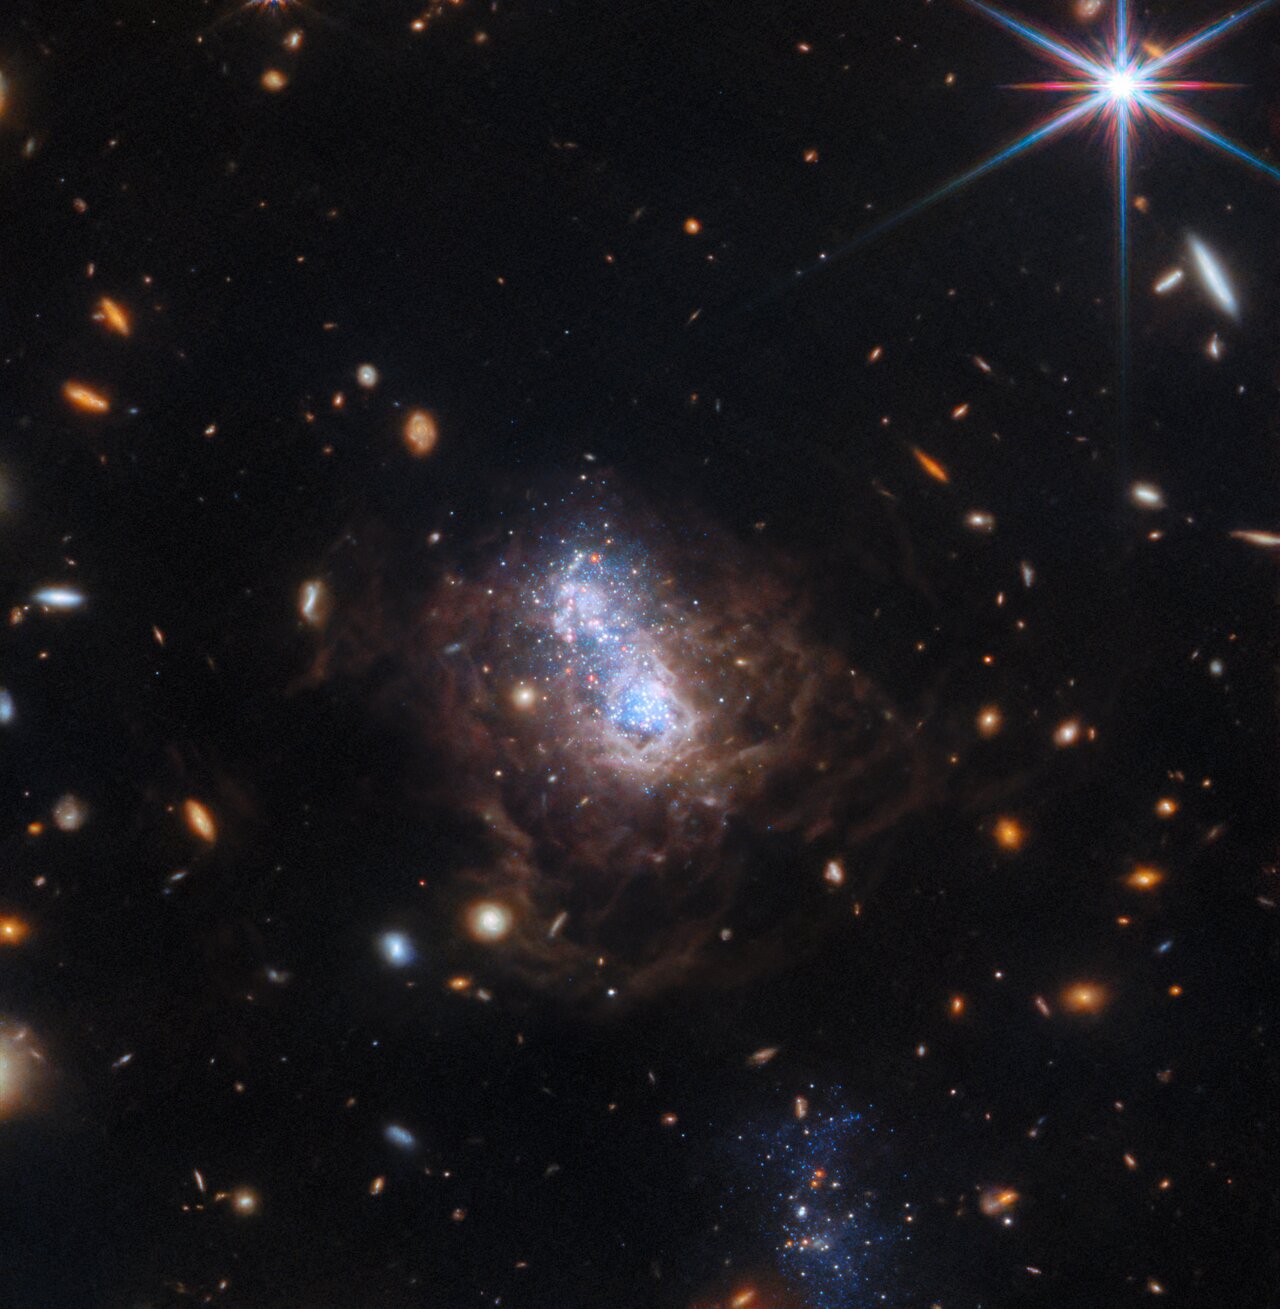 Many small galaxies are scattered on a black background: mainly white, oval and red, spiral galaxies.  The image is dominated by an irregular dwarf galaxy, which at its core is home to a bright region of white and blue stars that appear as two separate lobes.  This area is surrounded by brown dusty filaments.  Visible in the lower center of the image is a companion galaxy that appears as a collection of blue stars.  In the upper right corner is a very prominent, bright star with eight long diffraction peaks.